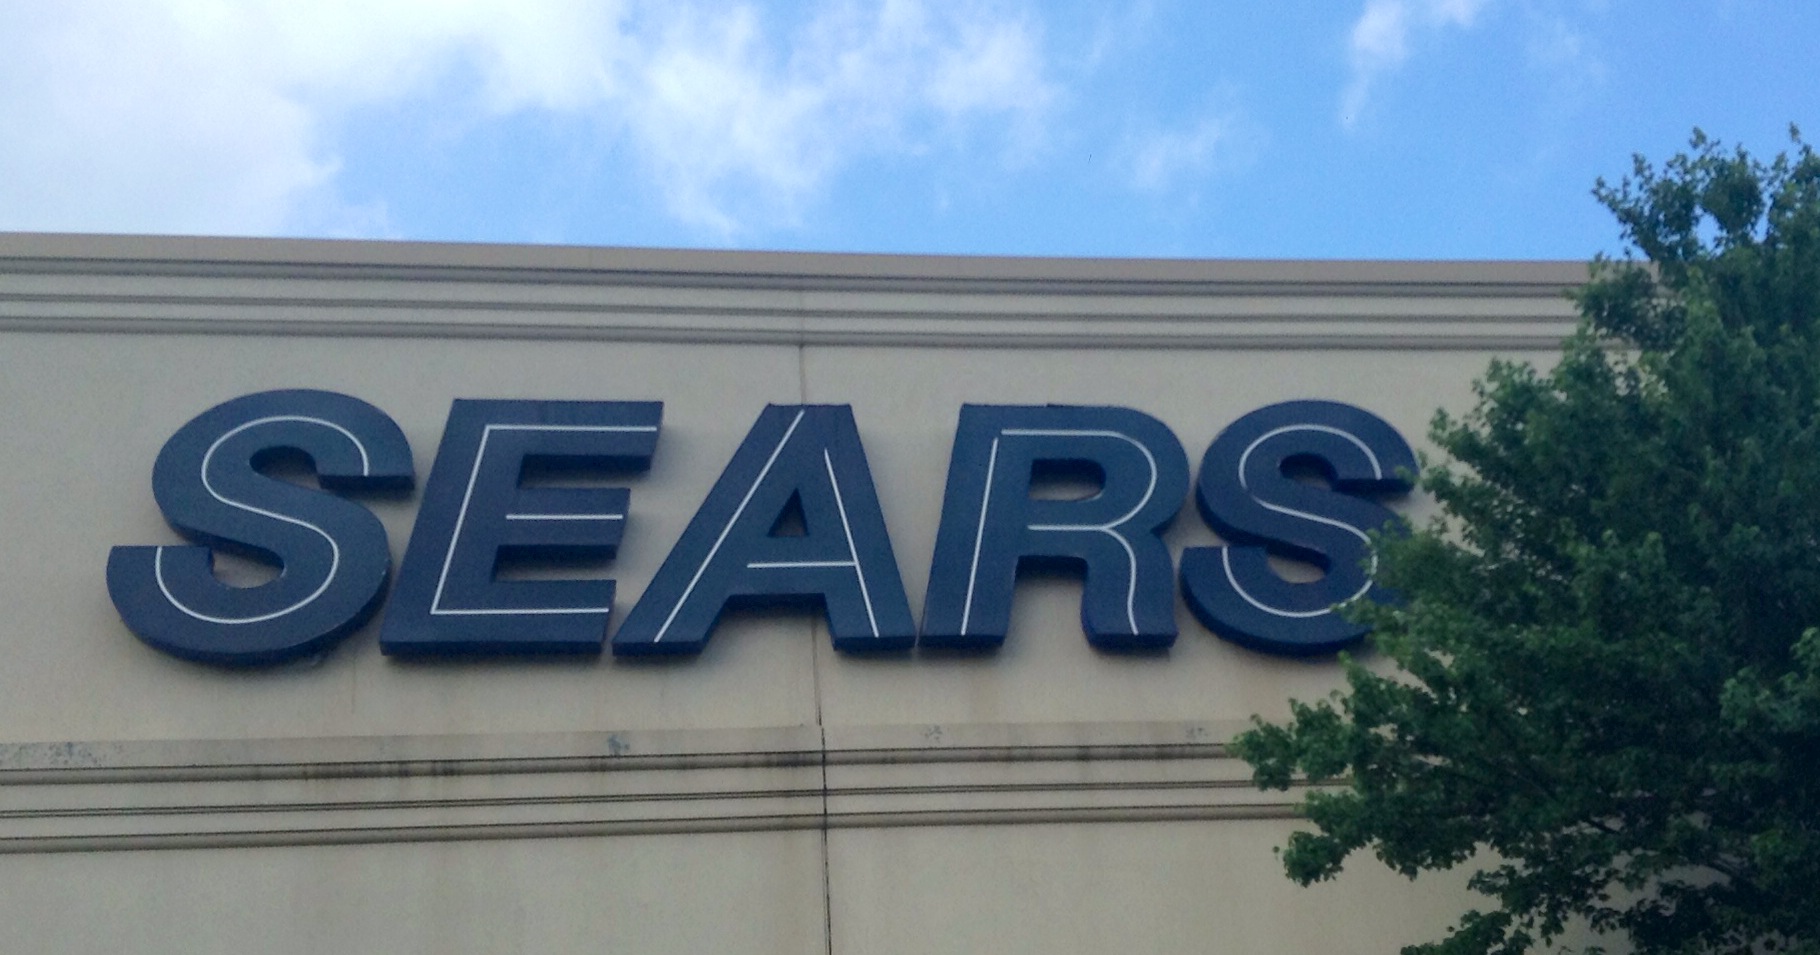 the exterior of an outdoor clothing store featuring an arched sign that reads searss